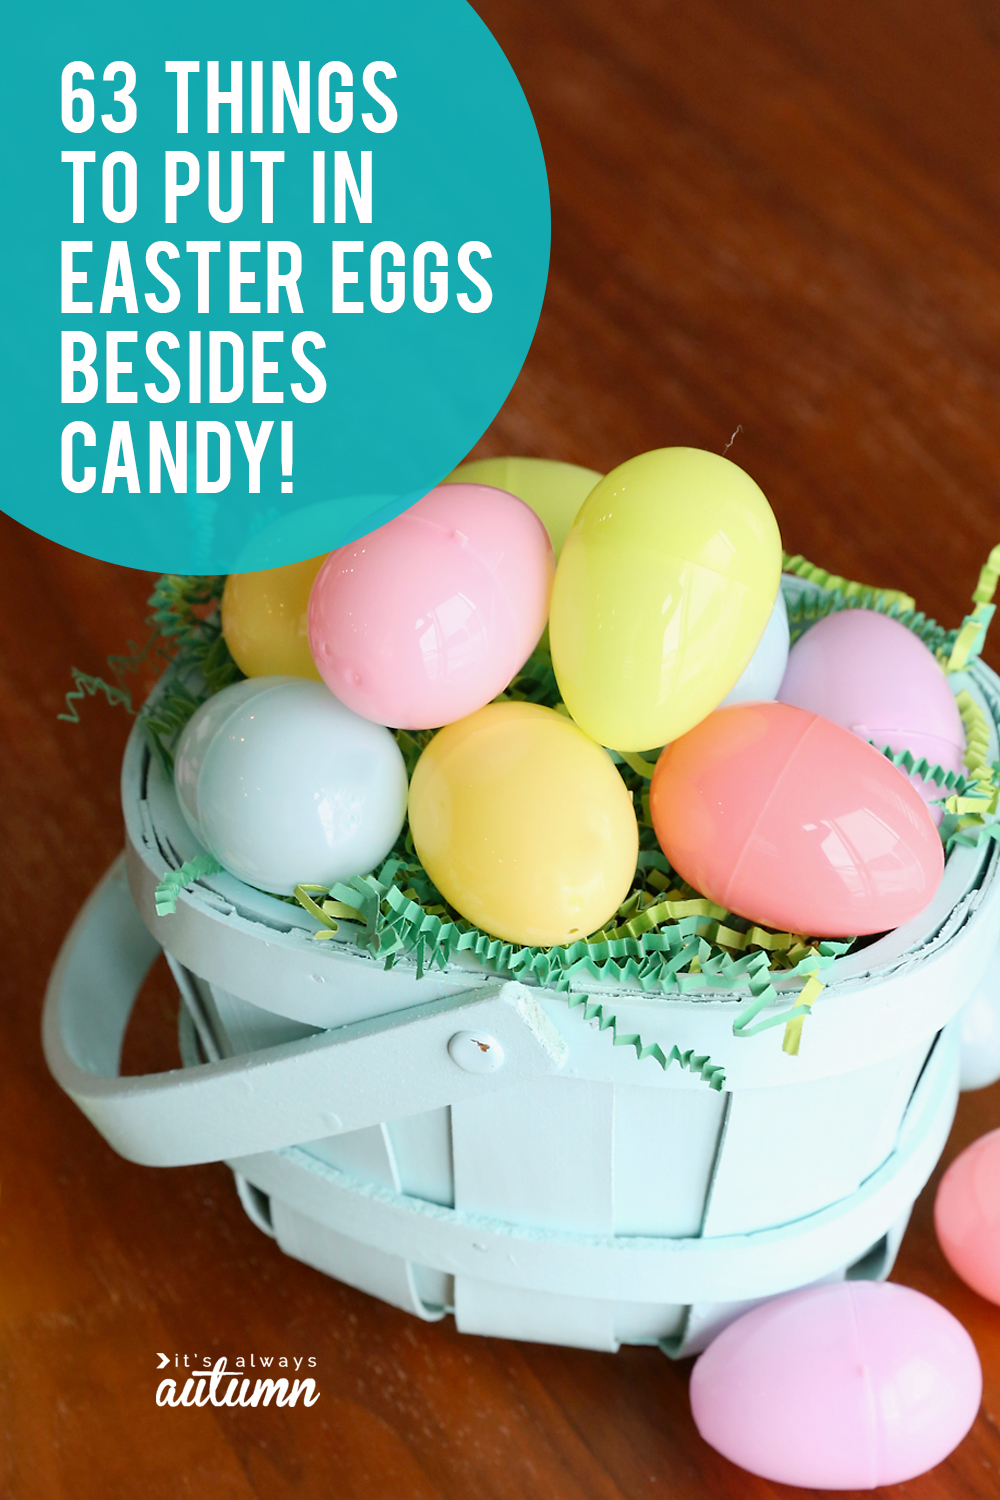 63 Easter egg fillers that aren't candy! Lots of ideas for what to put in Easter eggs besides candy.